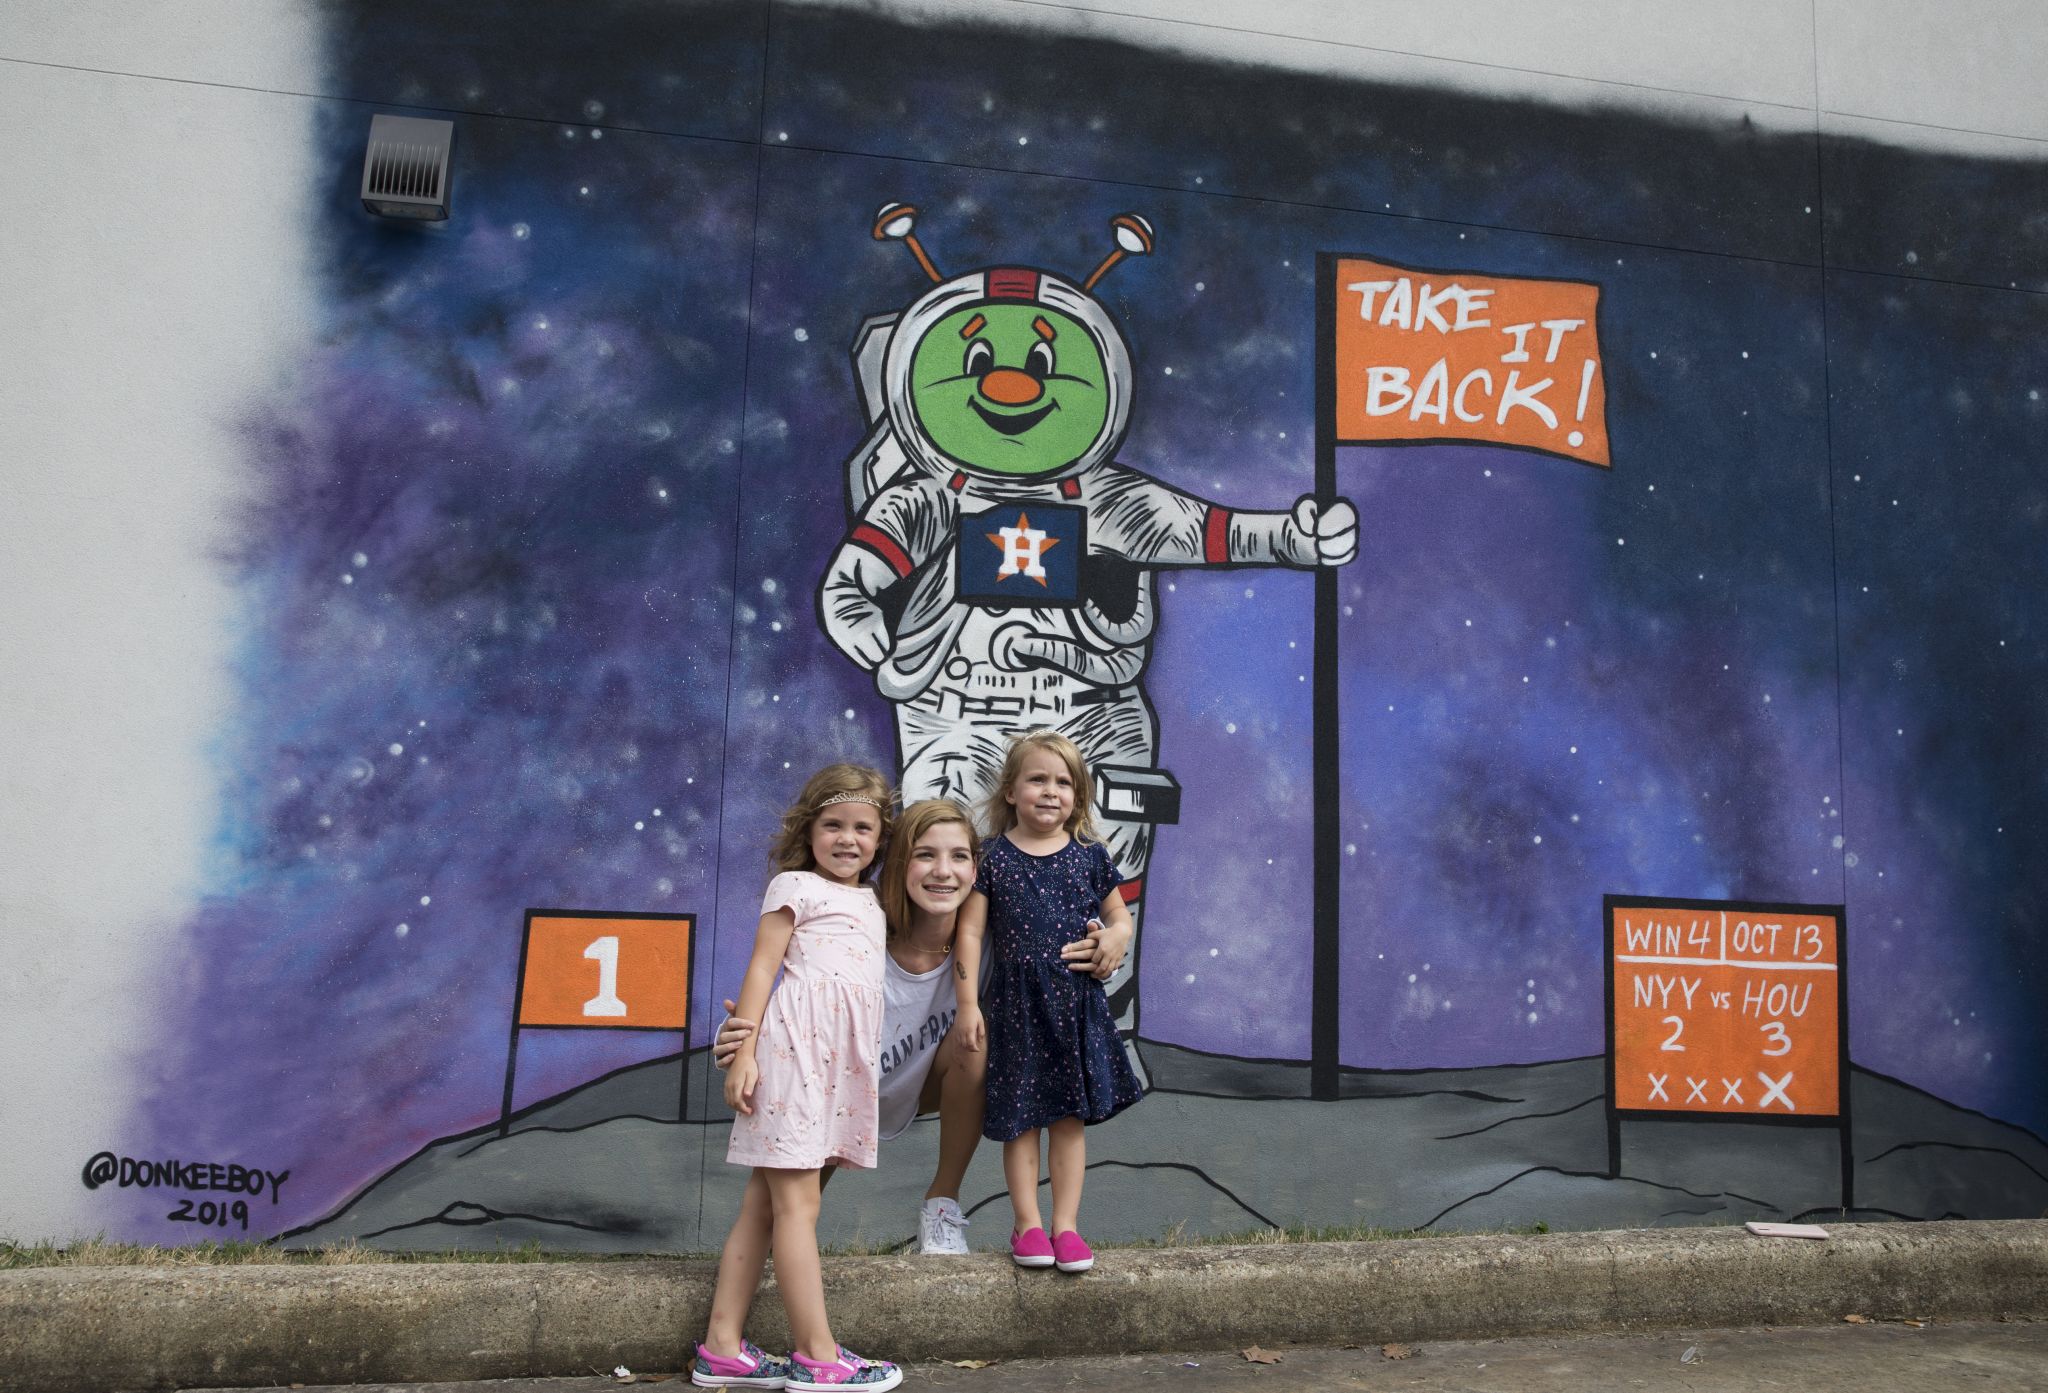 Where to Find the 2019 Houston Astros Postseason Murals – It's Not